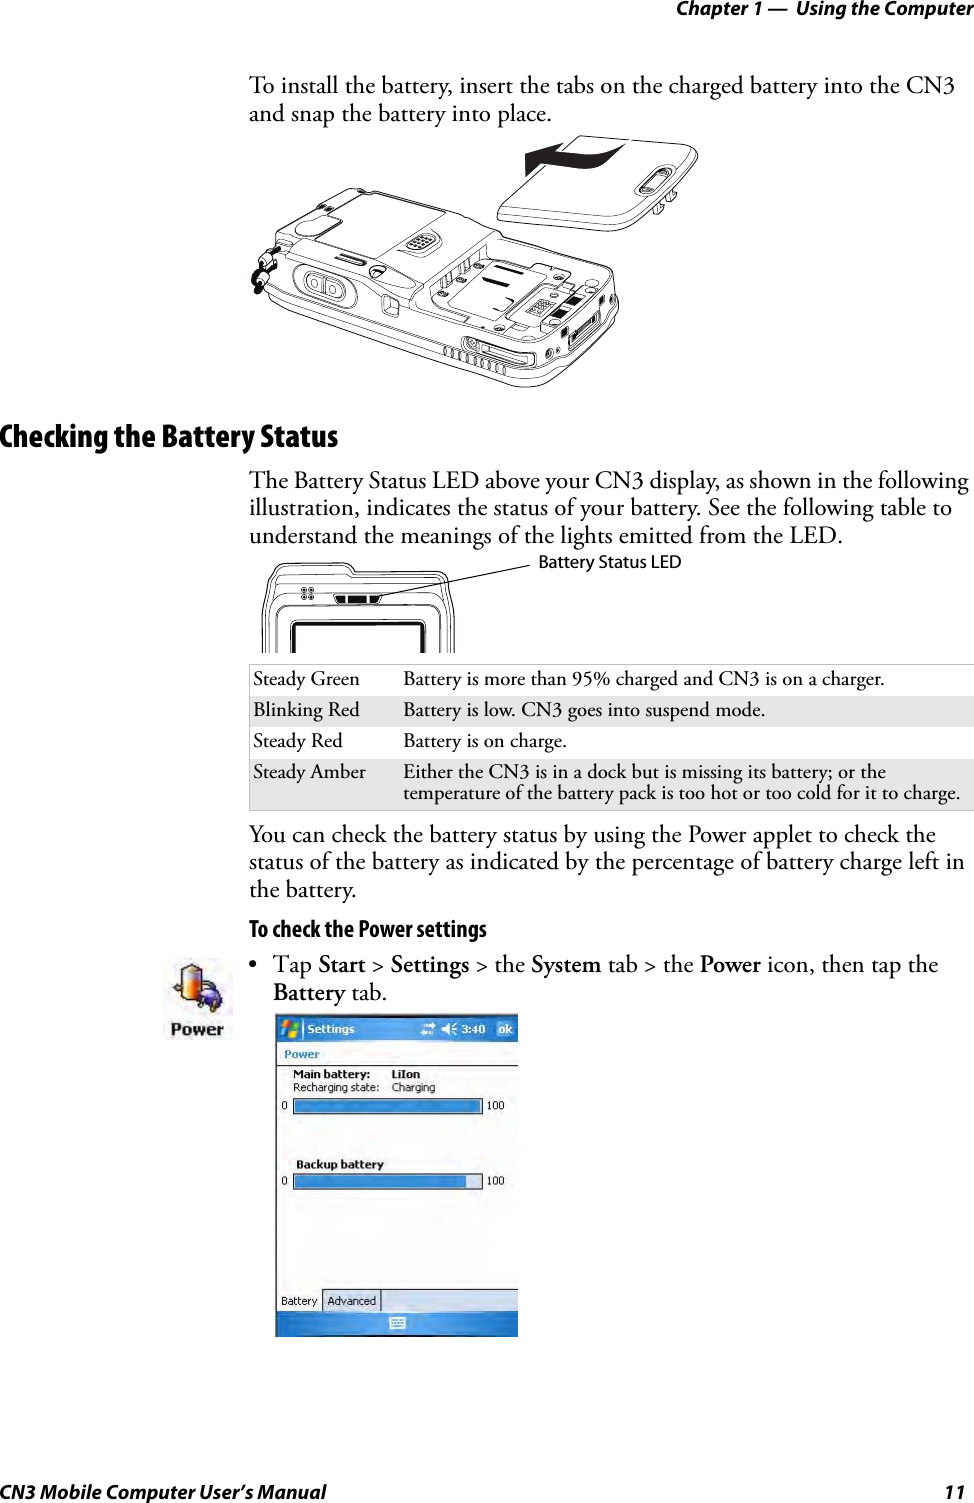 Chapter 1 —  Using the ComputerCN3 Mobile Computer User’s Manual 11To install the battery, insert the tabs on the charged battery into the CN3 and snap the battery into place.Checking the Battery StatusThe Battery Status LED above your CN3 display, as shown in the following illustration, indicates the status of your battery. See the following table to understand the meanings of the lights emitted from the LED.You can check the battery status by using the Power applet to check the status of the battery as indicated by the percentage of battery charge left in the battery.To check the Power settingsSteady Green Battery is more than 95% charged and CN3 is on a charger.Blinking Red Battery is low. CN3 goes into suspend mode.Steady Red Battery is on charge.Steady Amber Either the CN3 is in a dock but is missing its battery; or the temperature of the battery pack is too hot or too cold for it to charge.•Tap Start &gt; Settings &gt; the System tab &gt; the Power icon, then tap the Battery tab.Battery Status LED